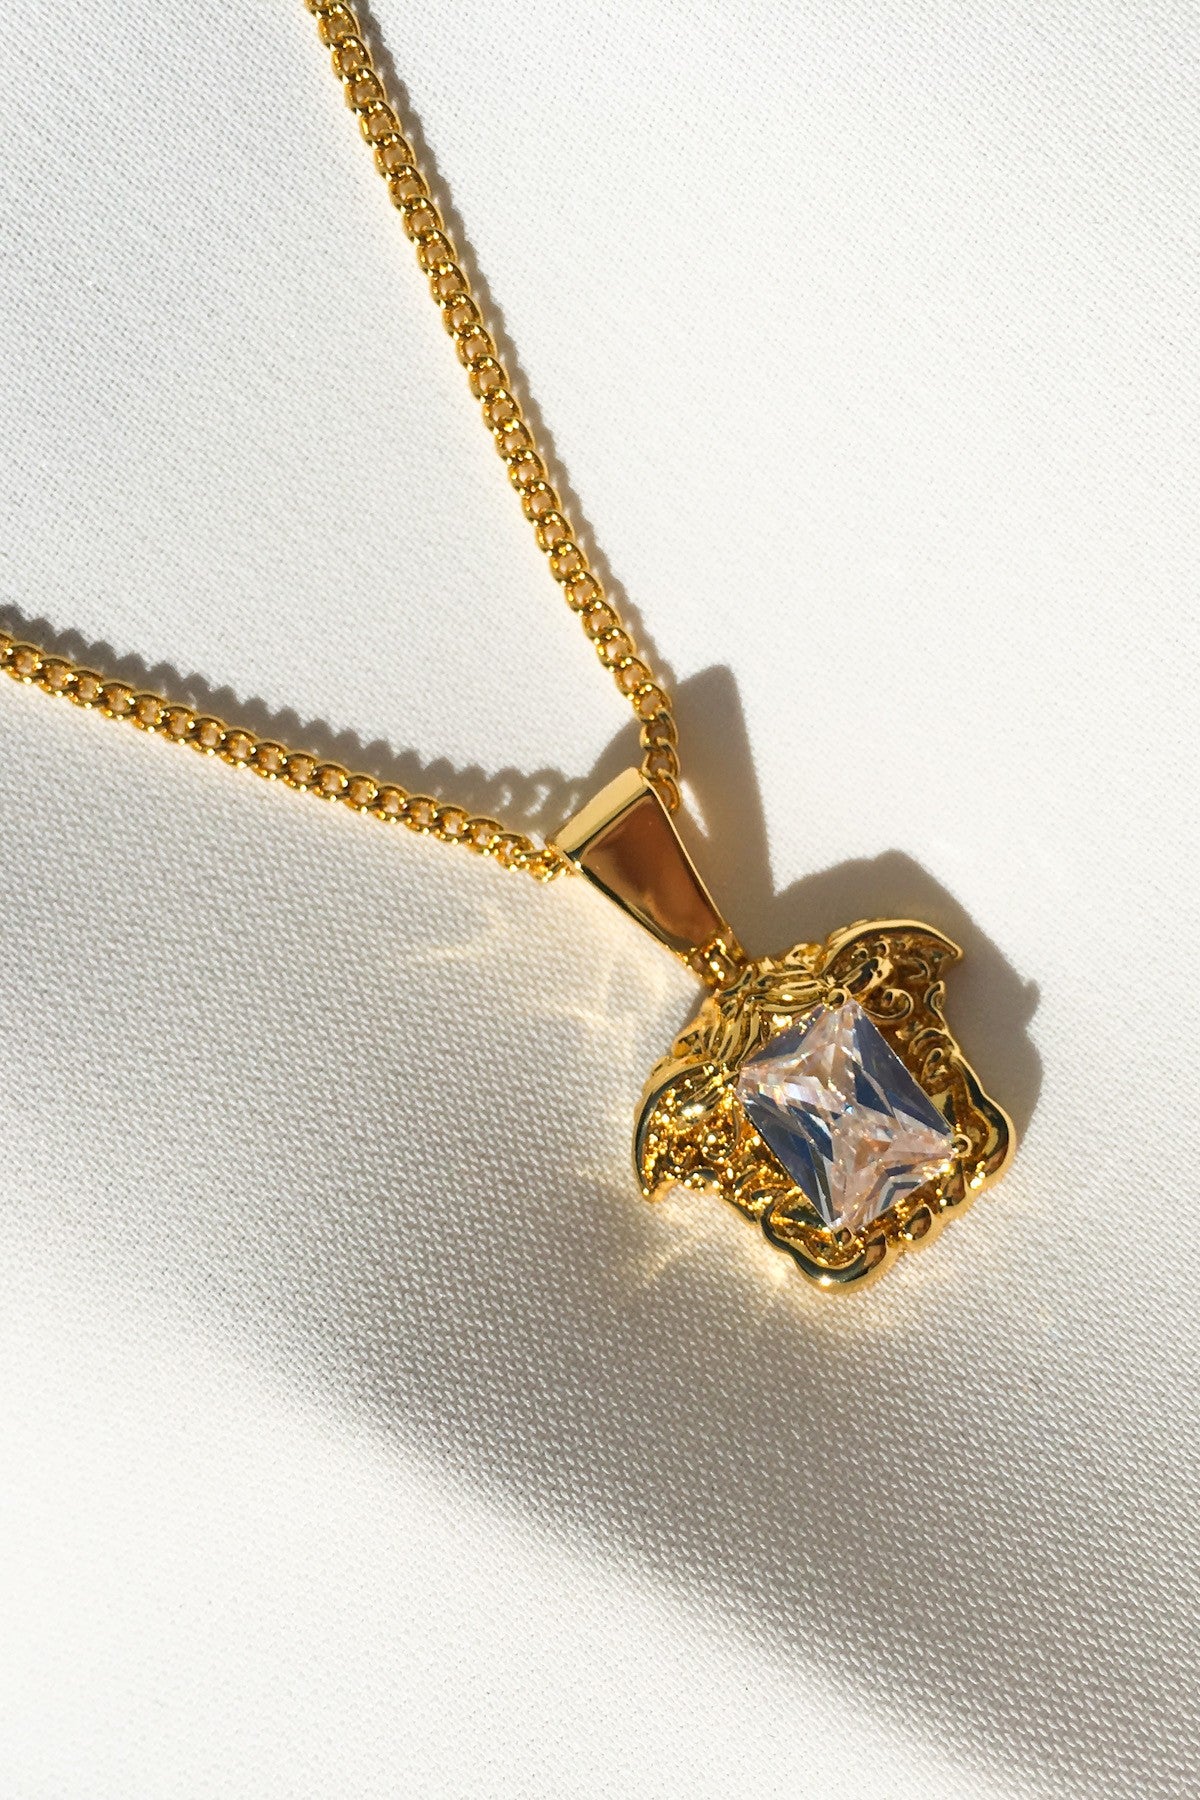 Real Quartz Necklace on 18kt Gold Plated Chain/ Joshua Tree Raw